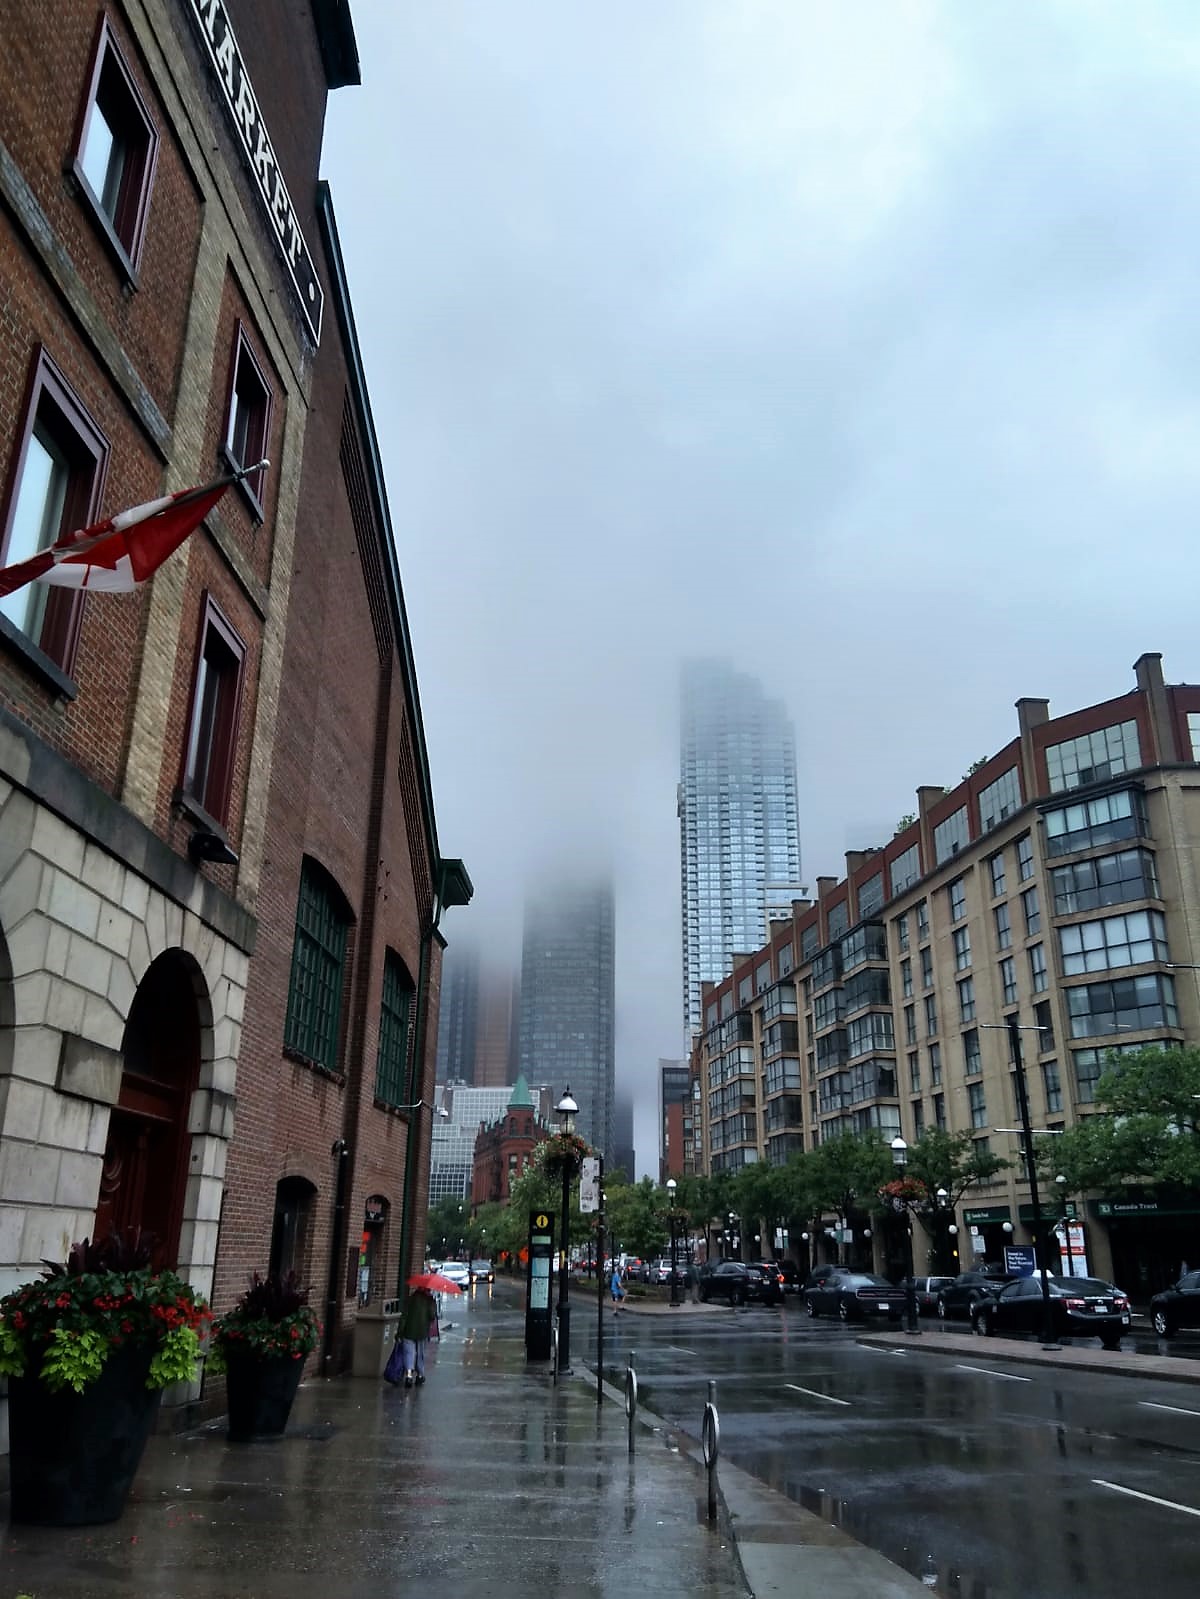 A foggy day in Toronto